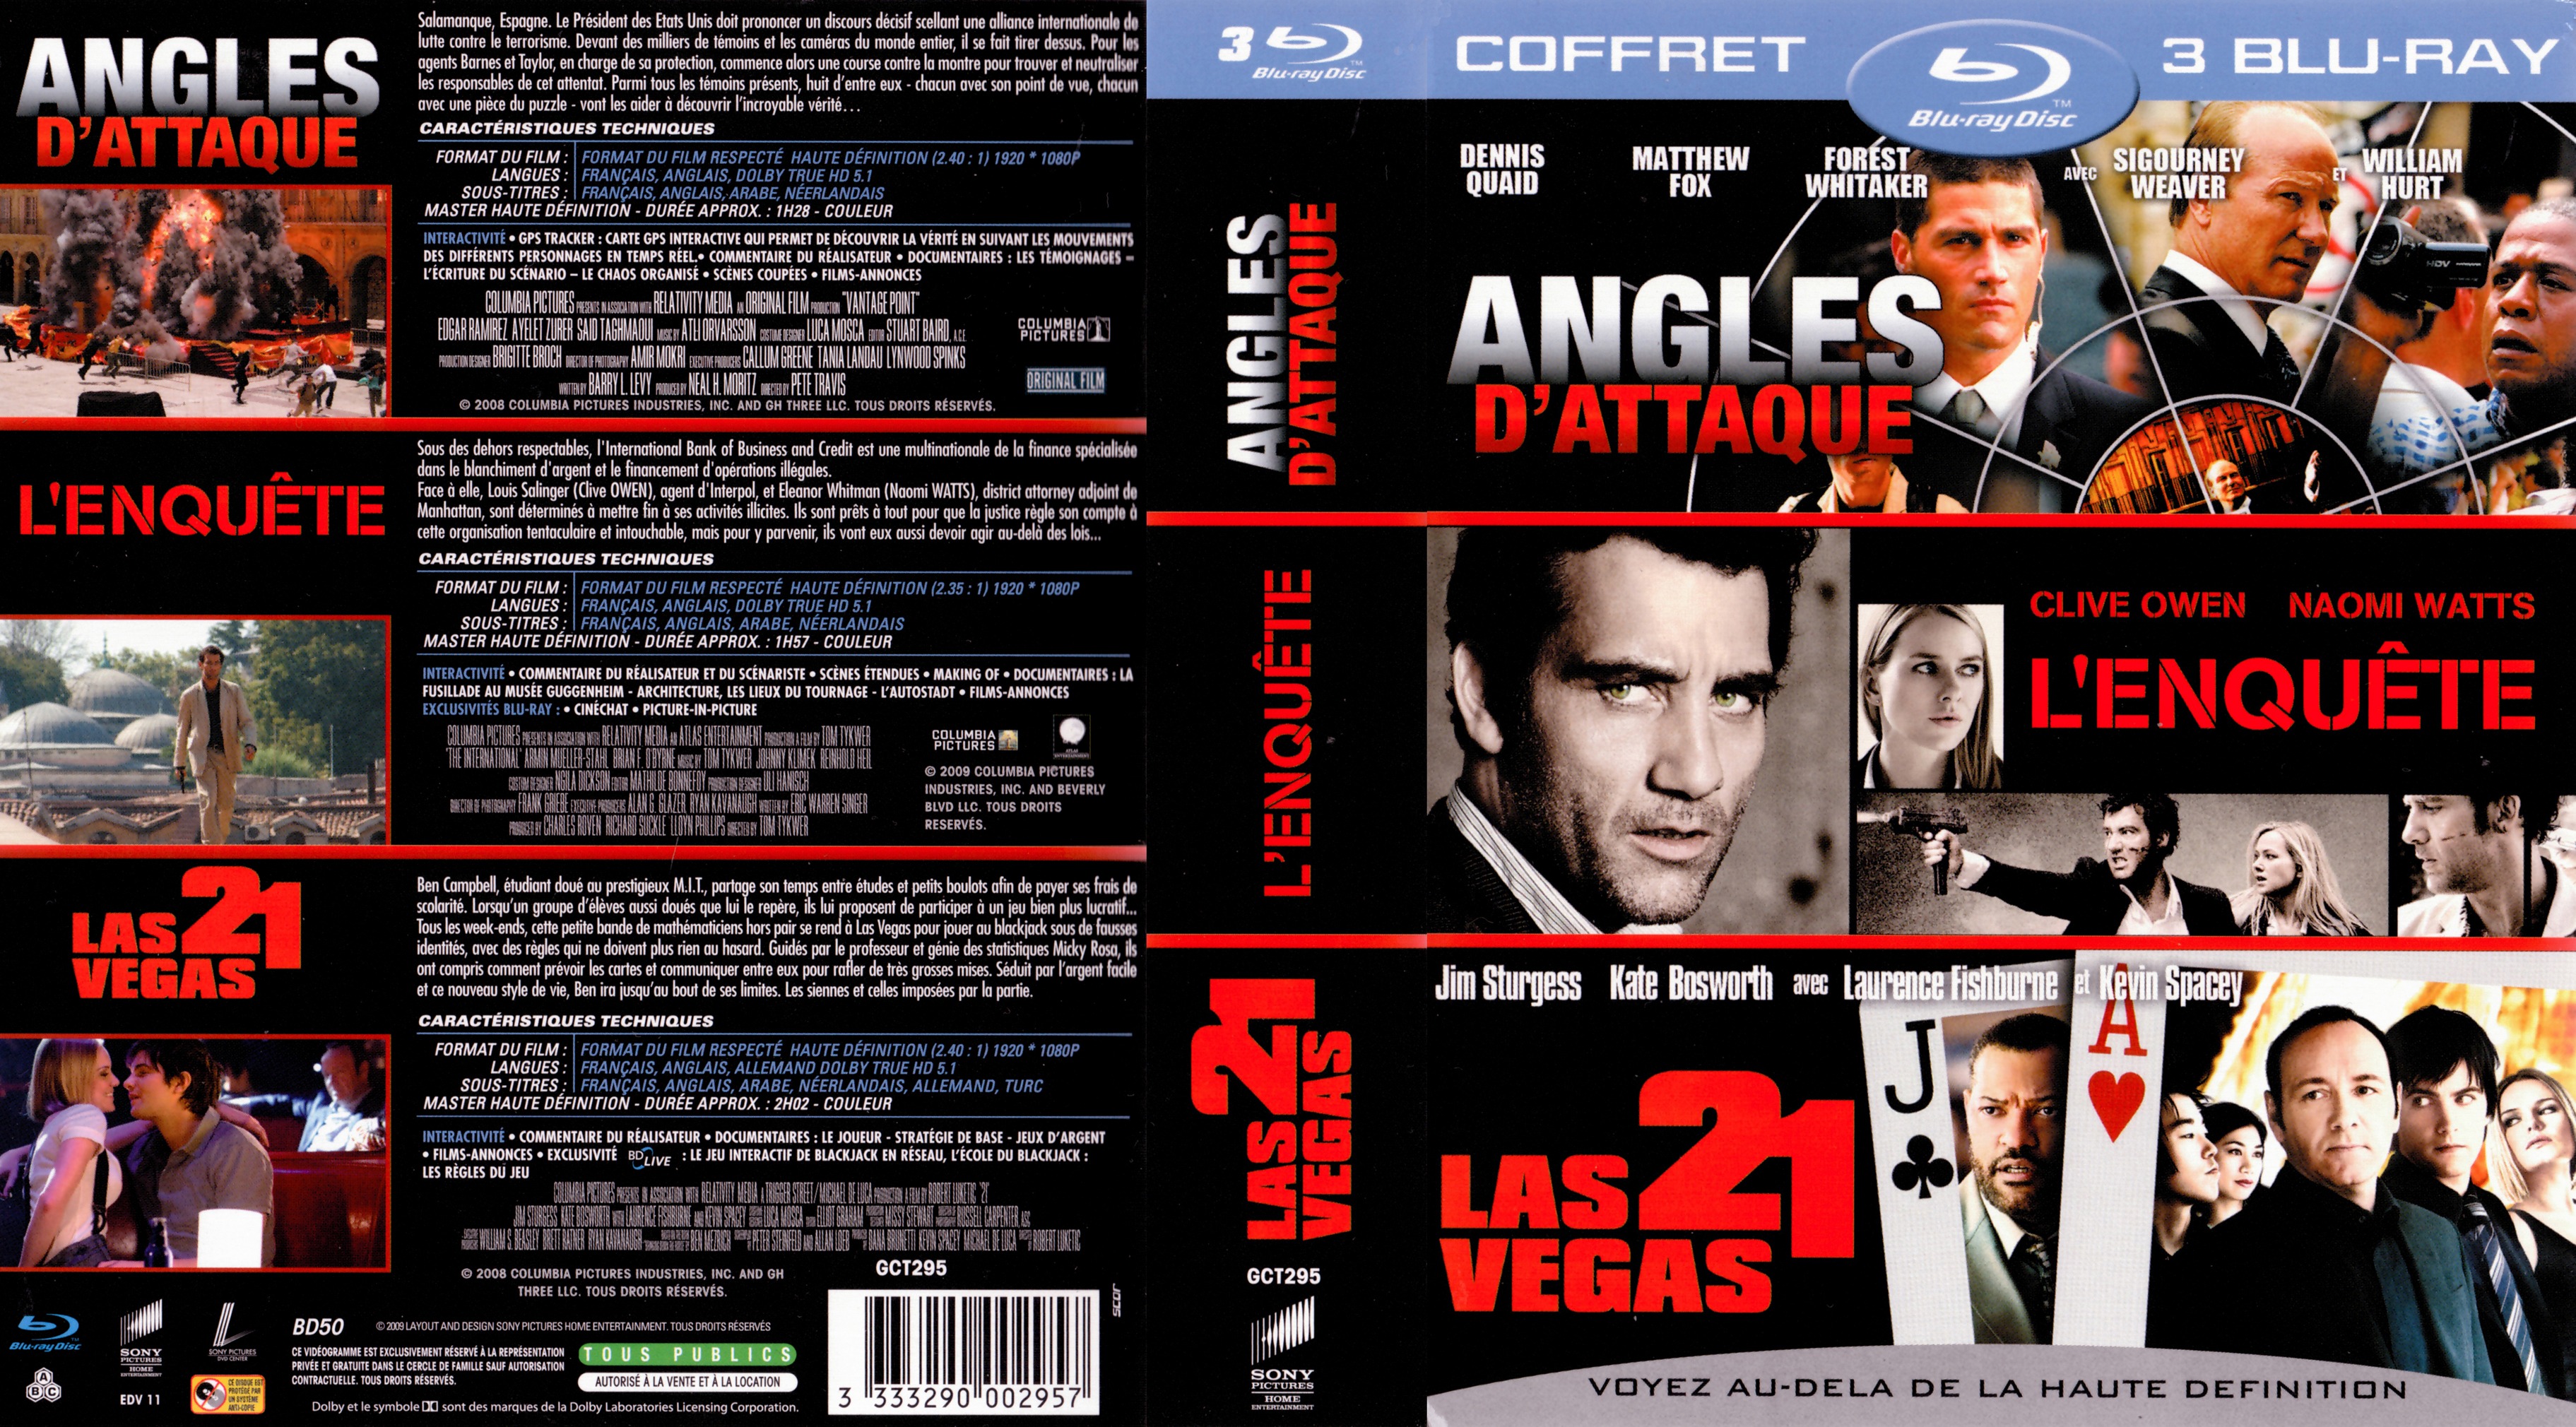 Jaquette DVD Angles d